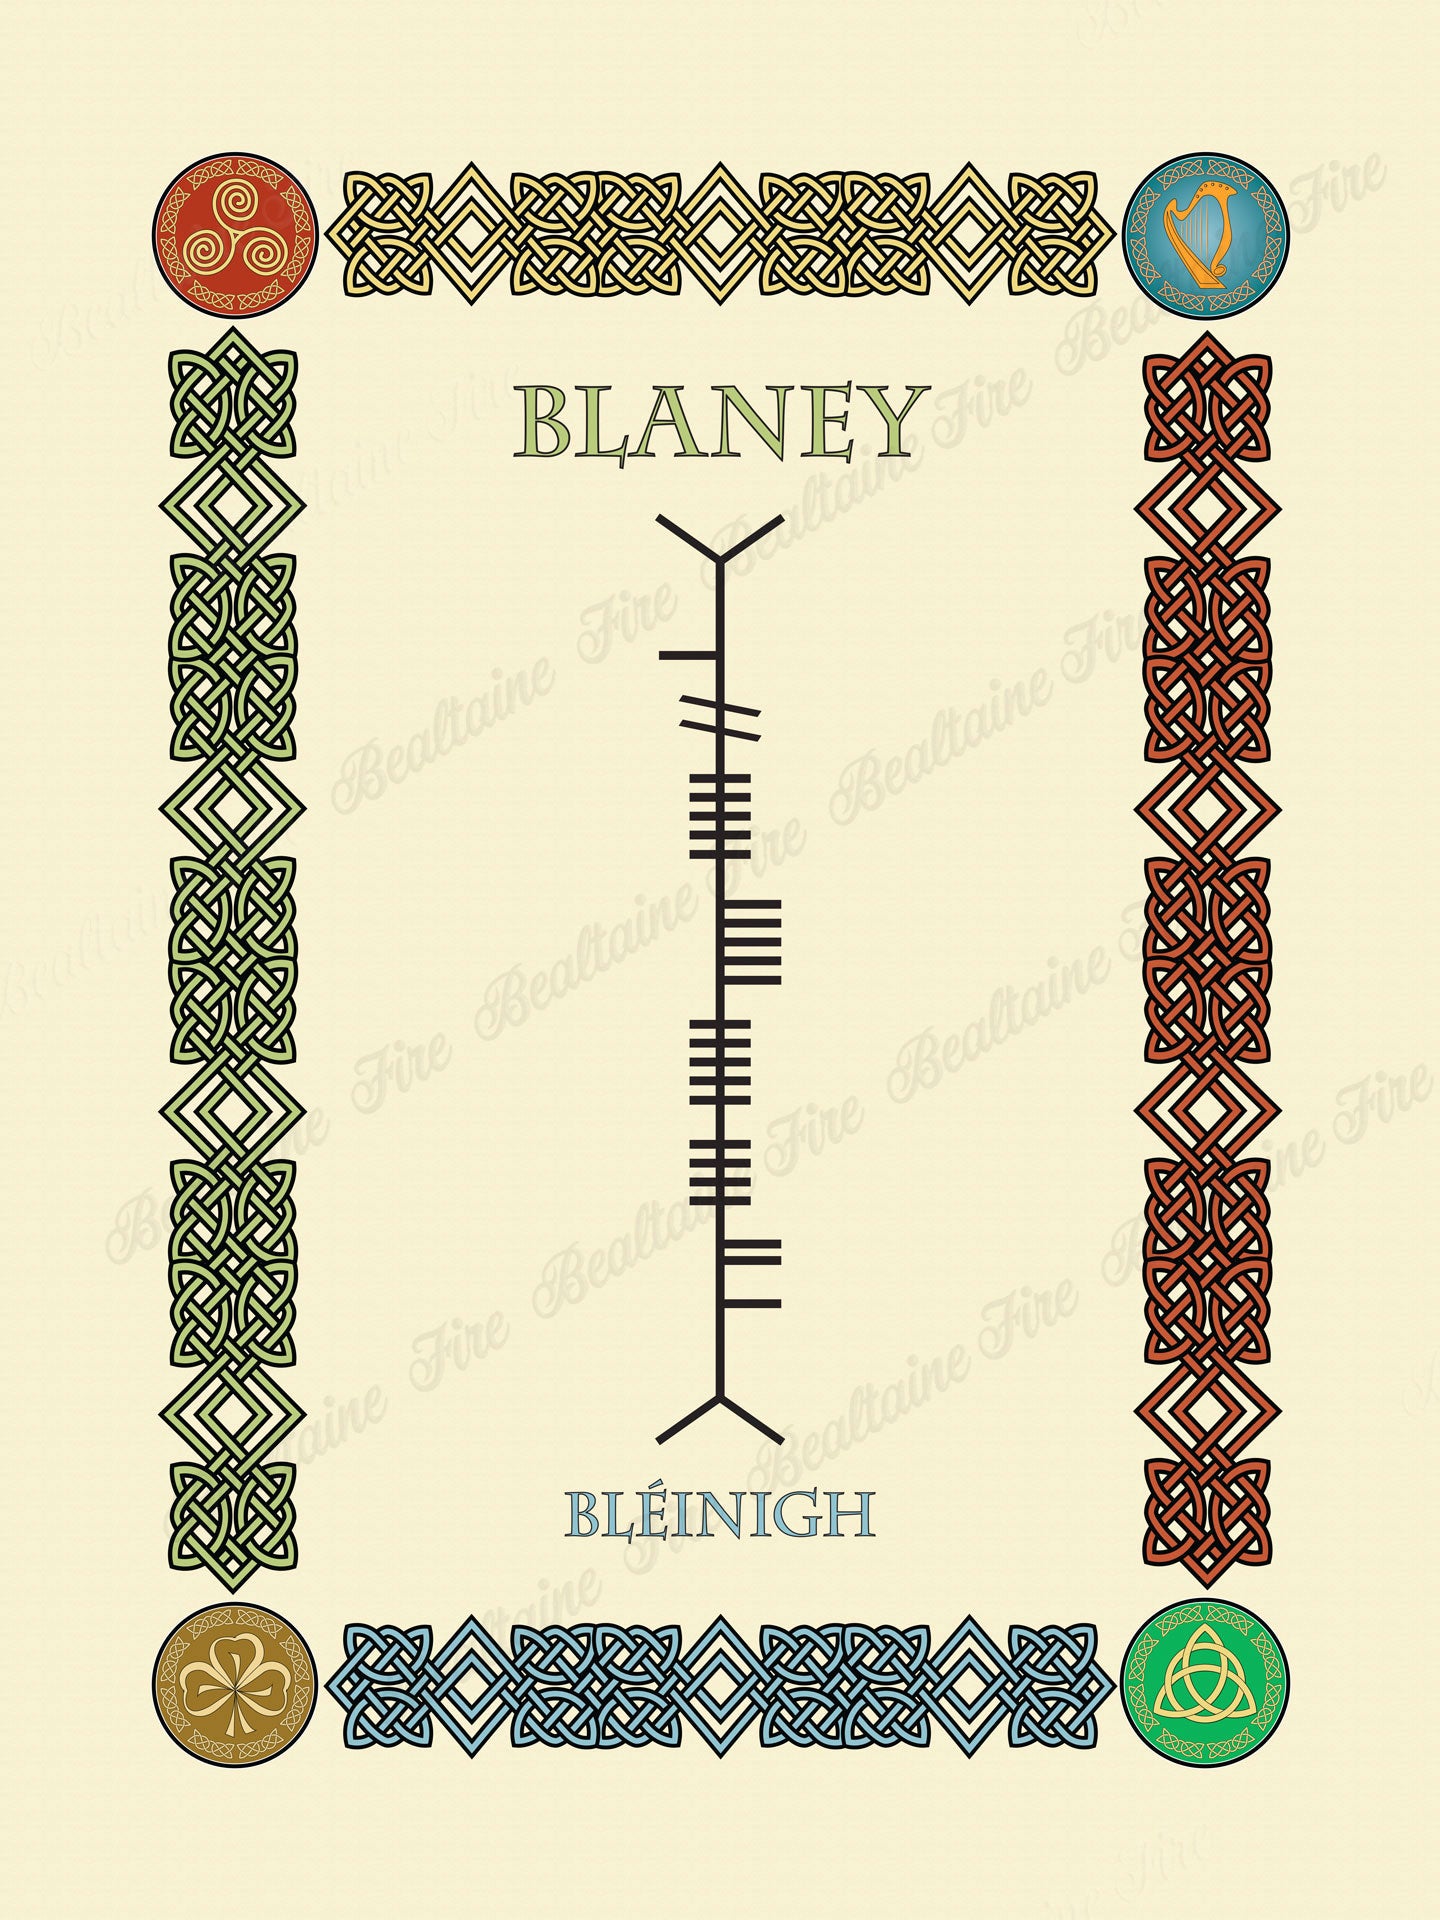 Blaney in Old Irish and Ogham - Premium luster unframed print